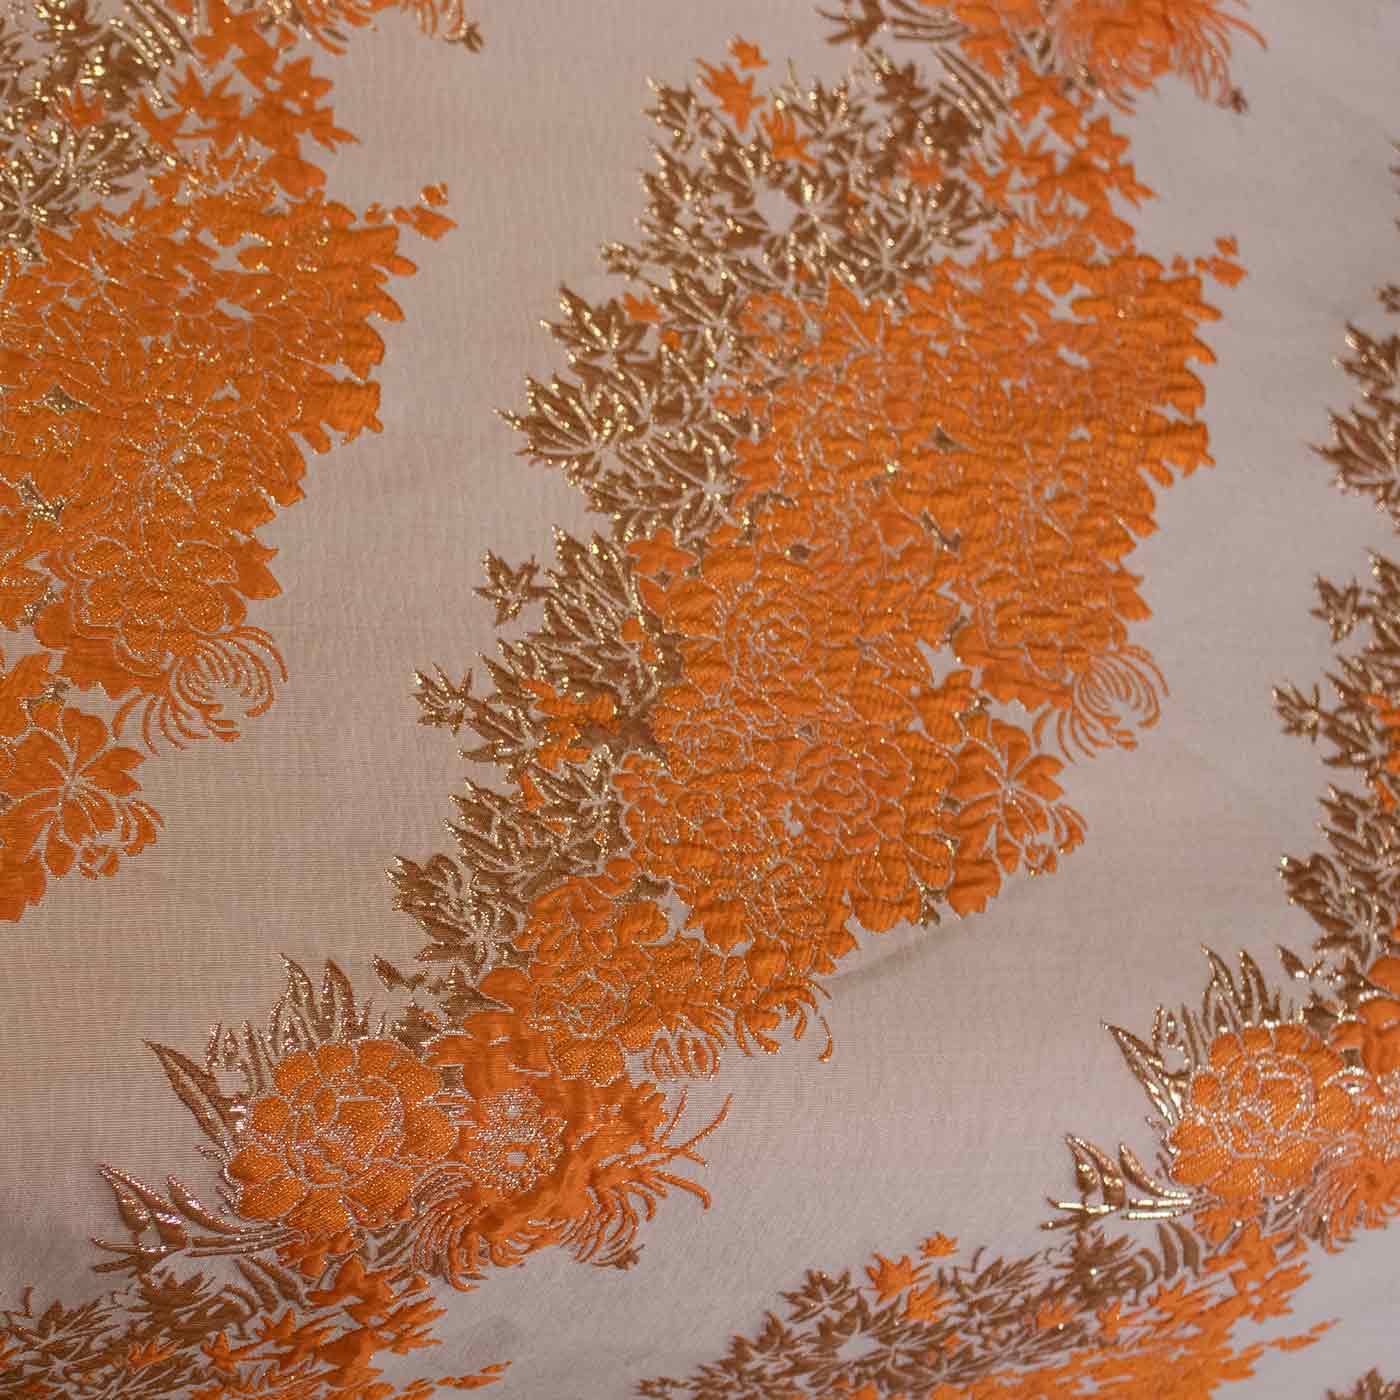 Orange and Gold Abstract Floral Brocade Fabric